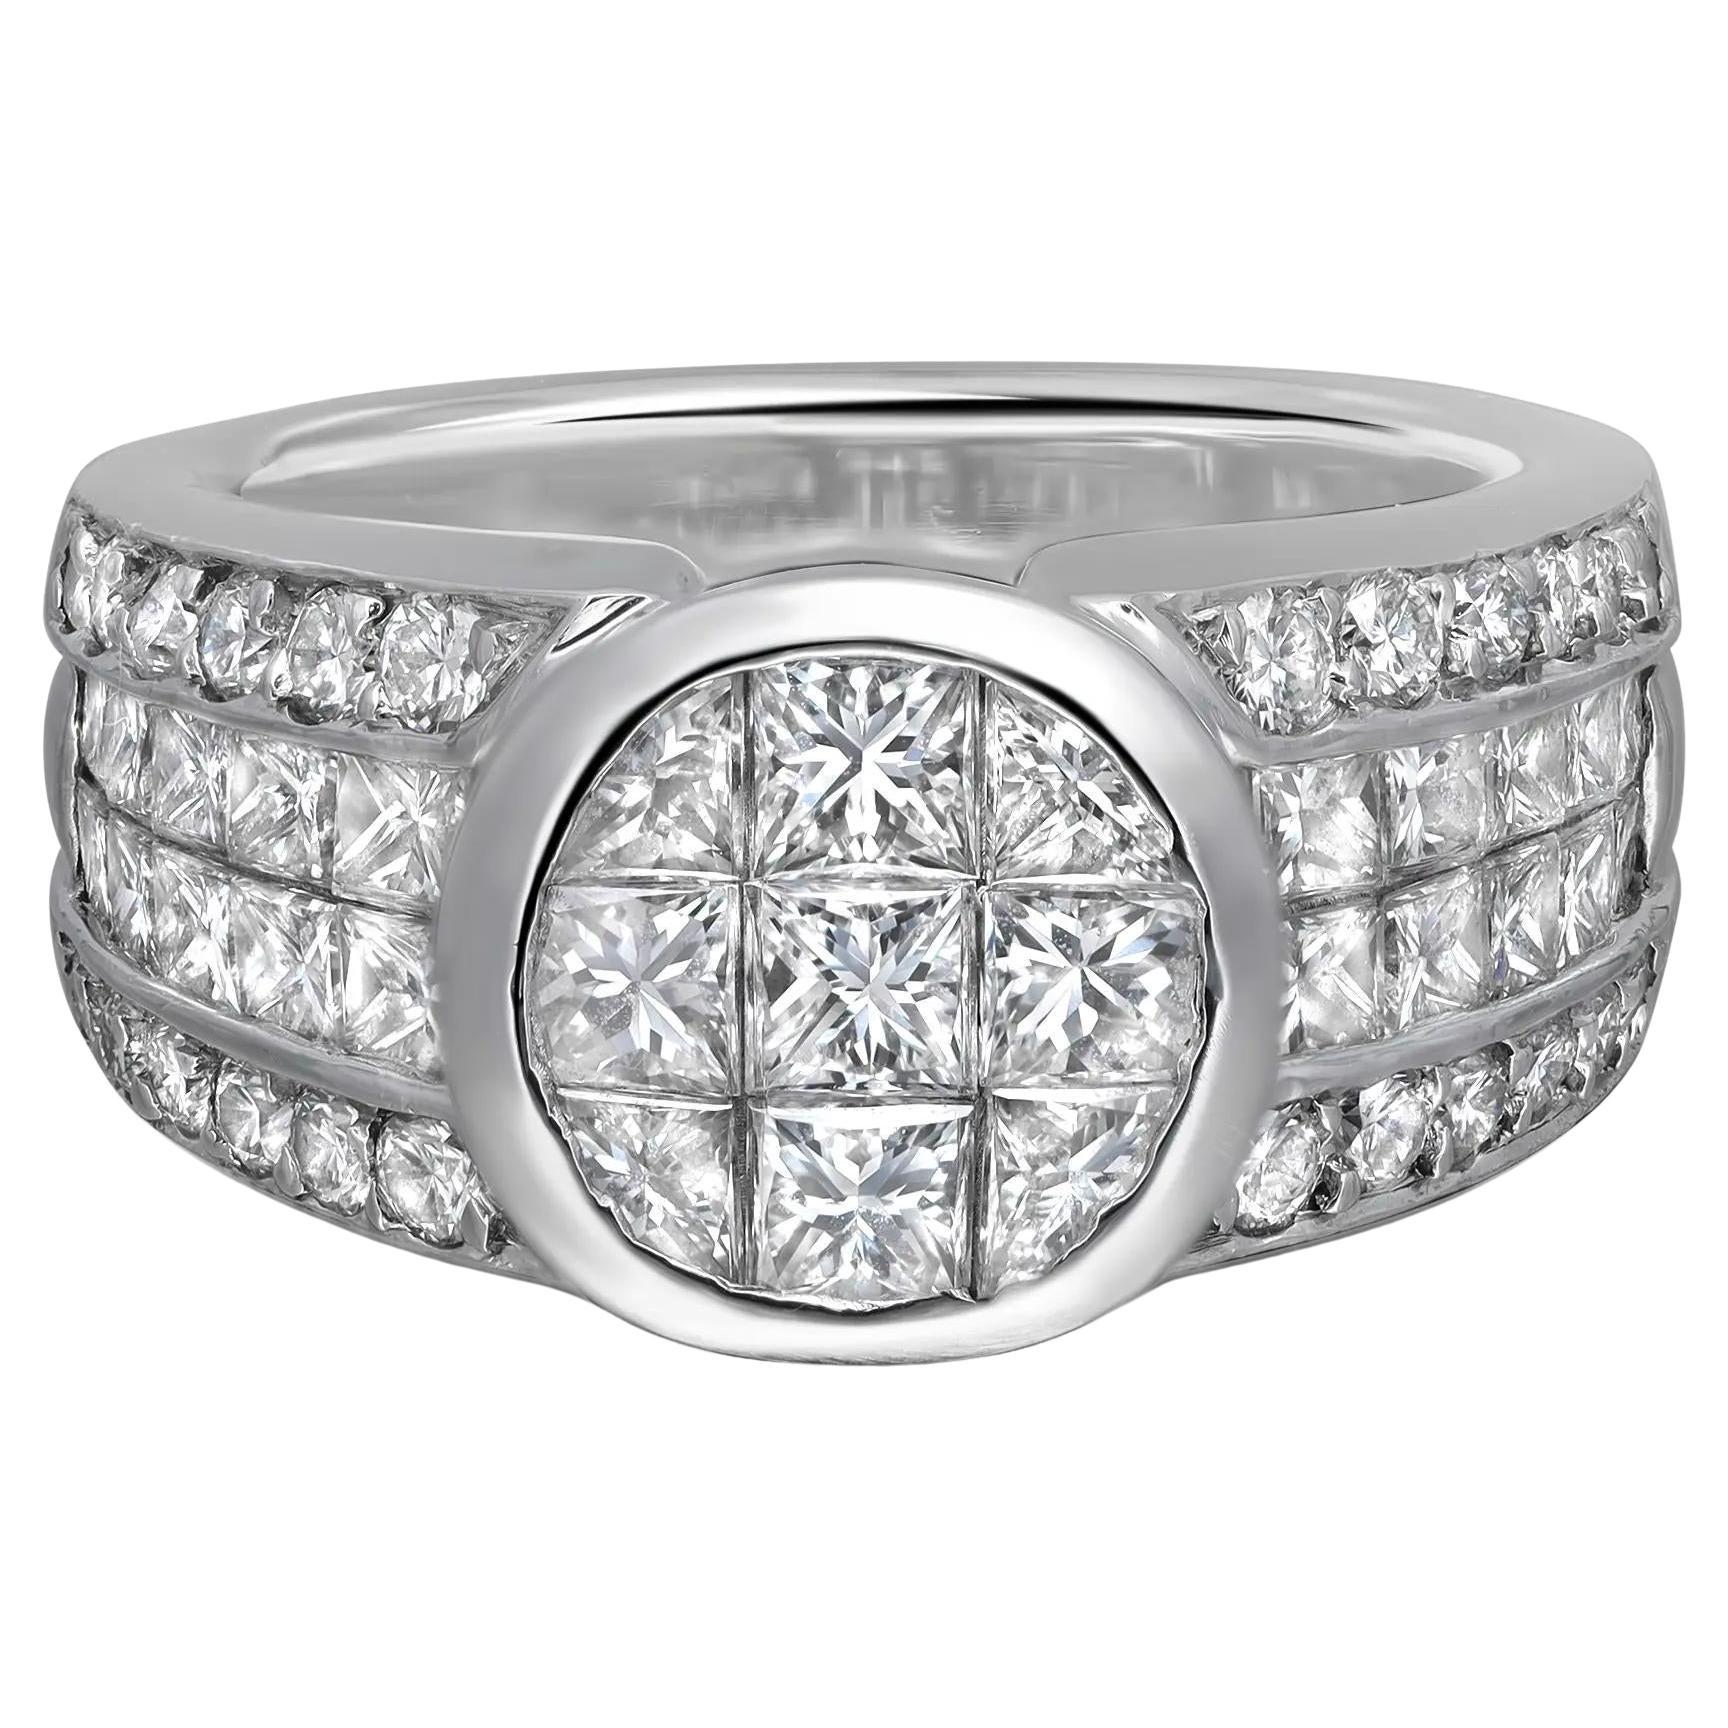 2.00Cttw Princess And Round Cut Diamond Band Ring 18K White Gold Size 6.75 For Sale